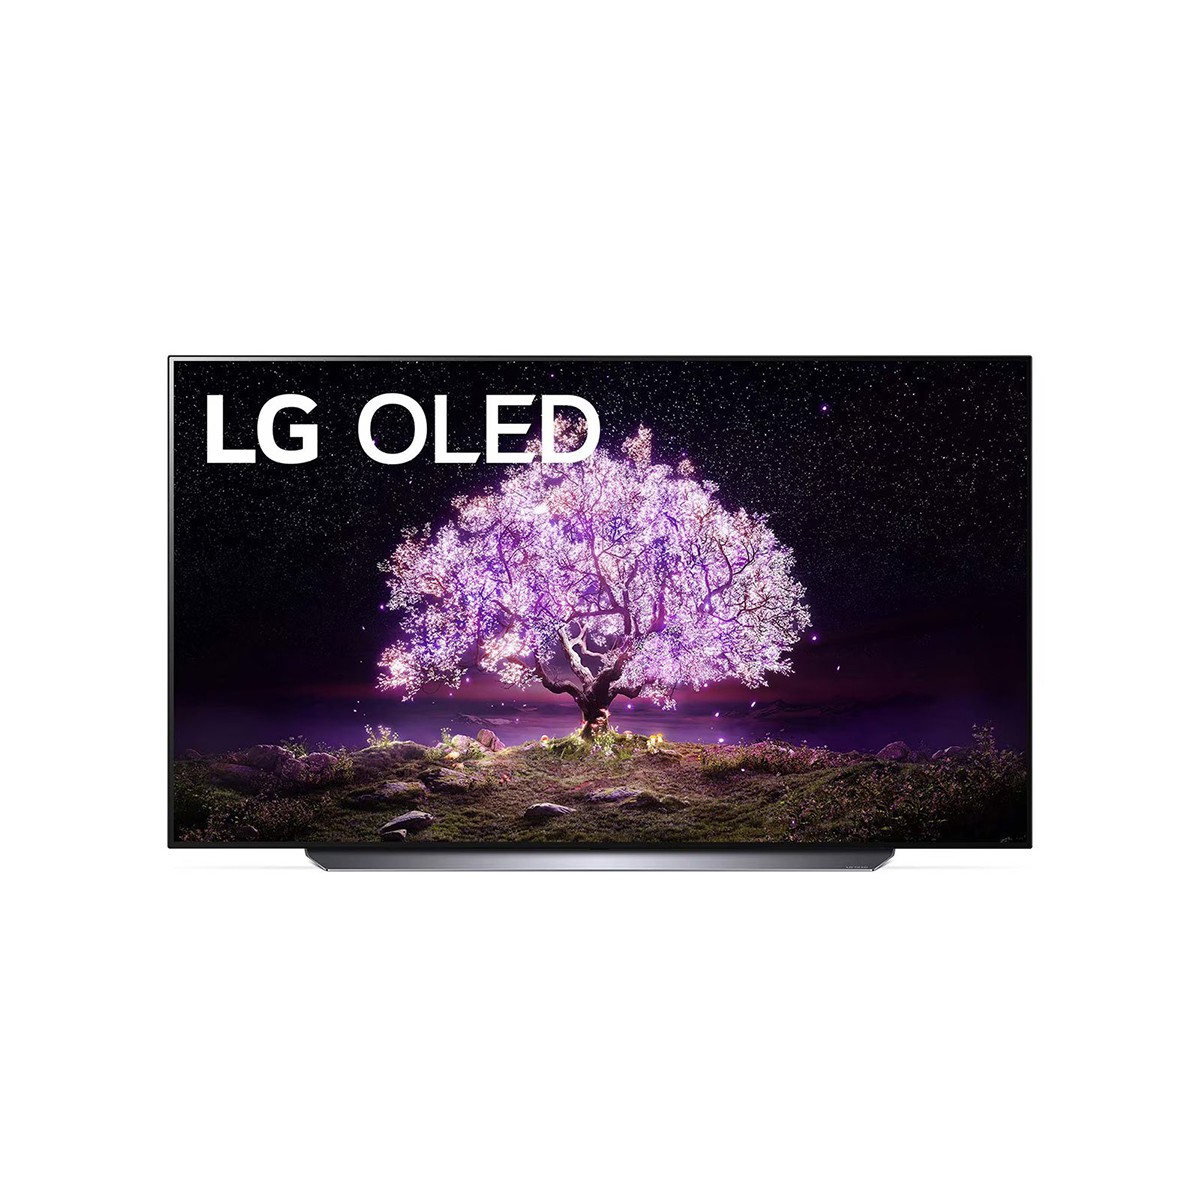 LG OLED HDR 4K Ultra HD Smart TV, 55 inch with Freeview HD/Freesat HD & Dolby Atmos, Black